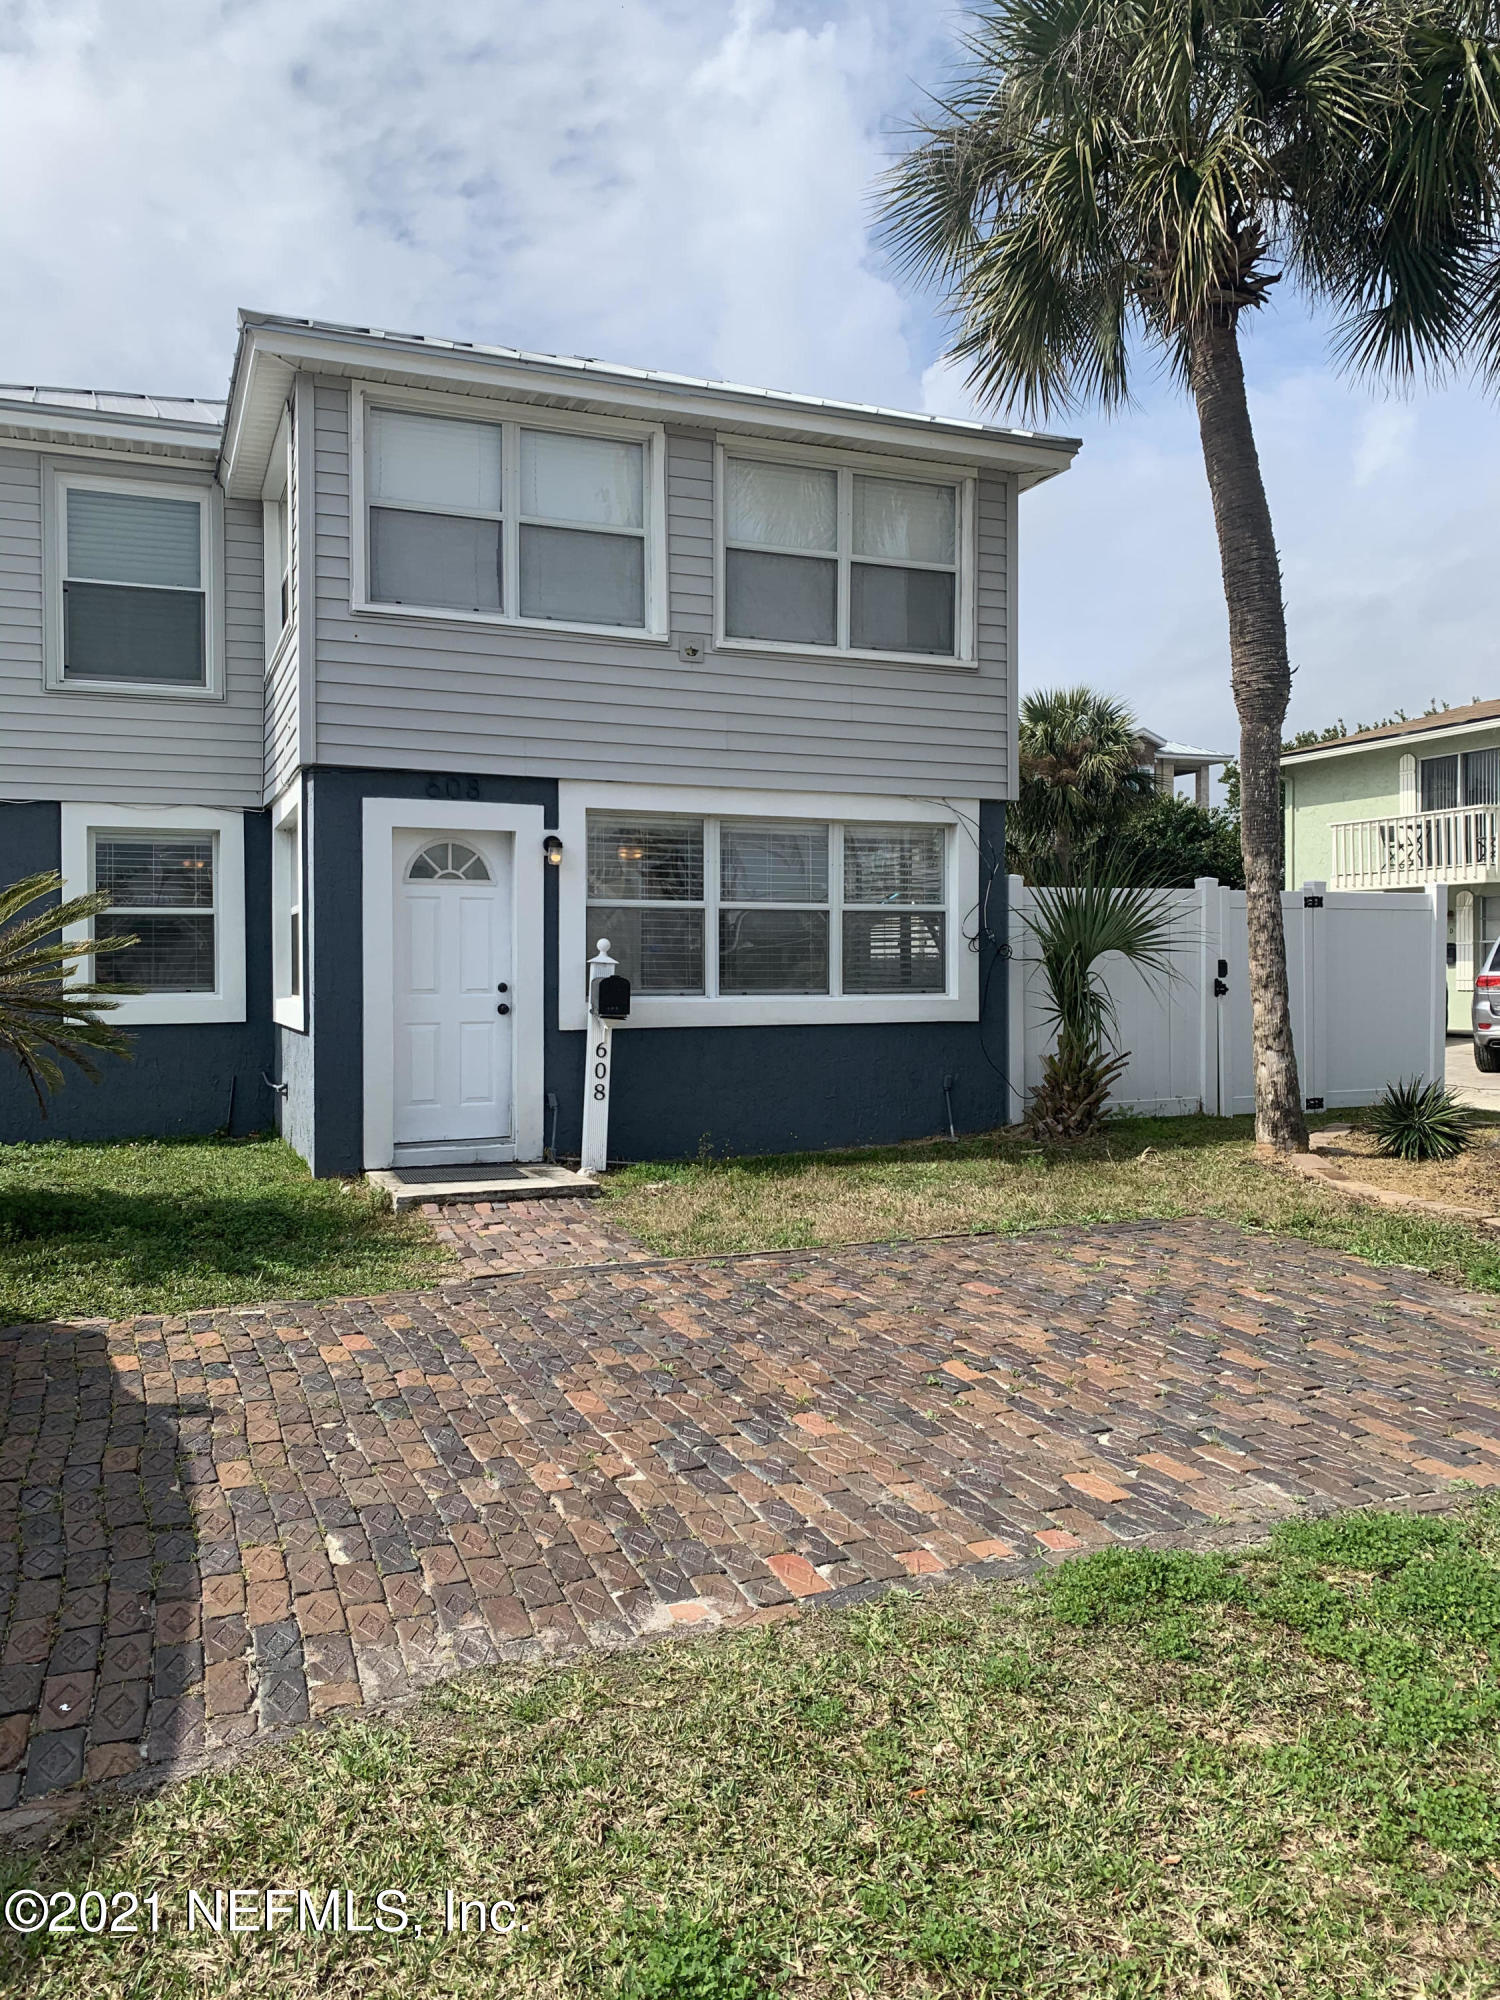 Jacksonville Beach, FL home for sale located at 608 4th Street N, Jacksonville Beach, FL 32250